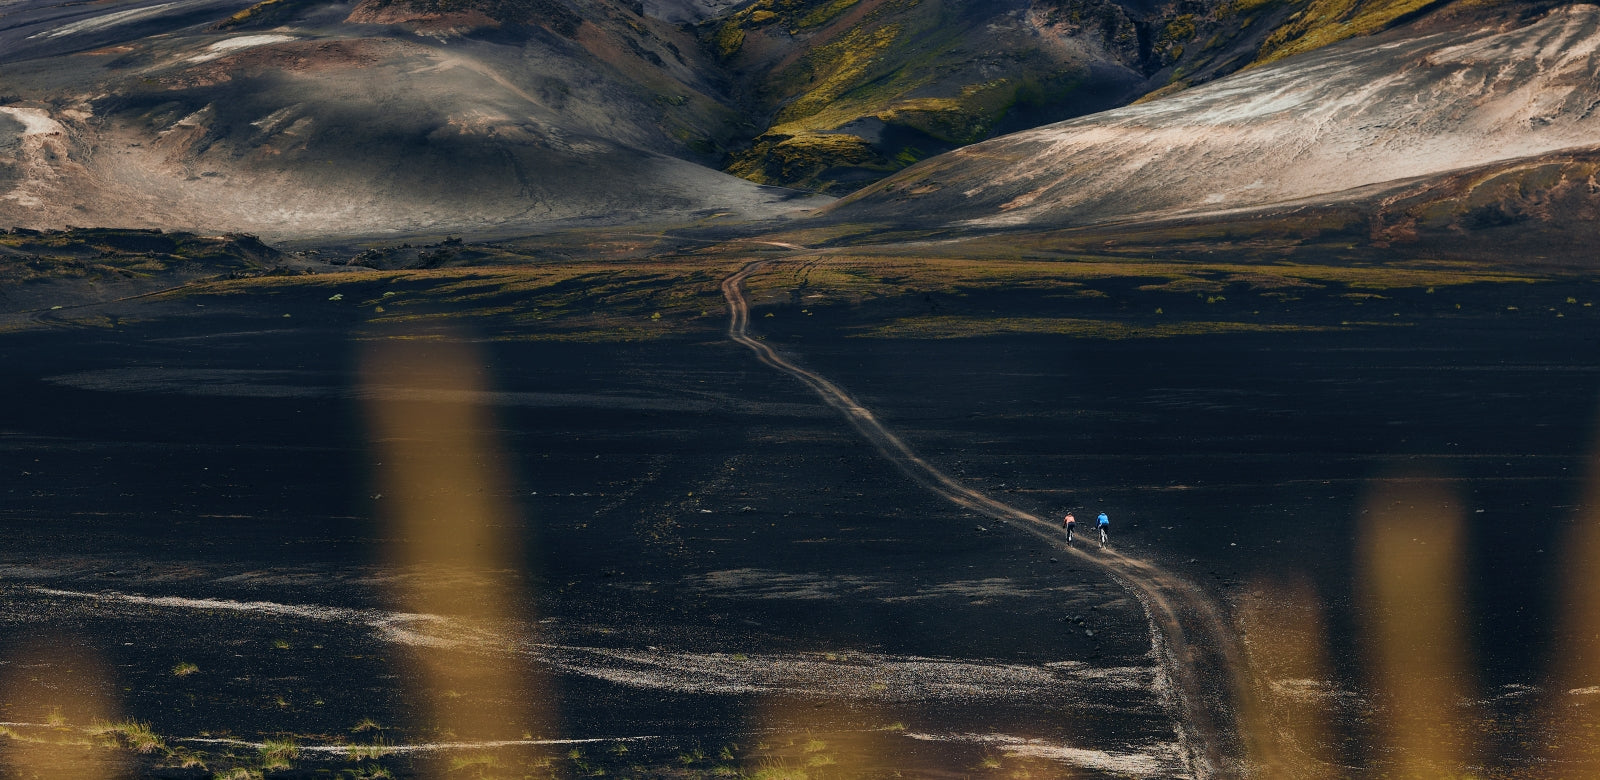 Two riders navigating a winding gravel path through a dramatic, sunlit mountainous landscape @ Bici.